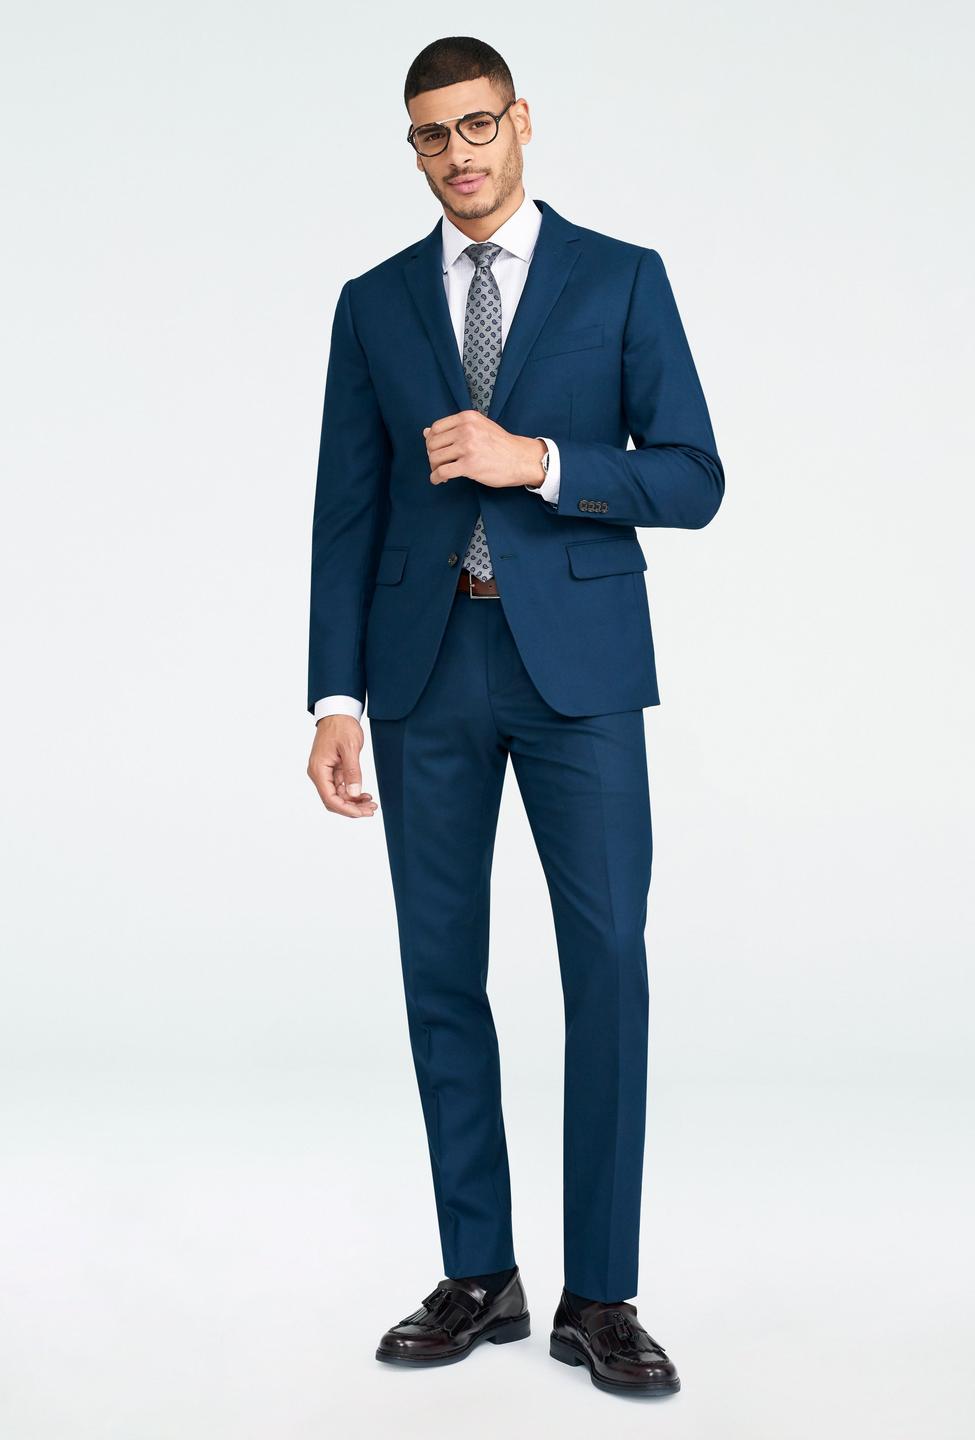 Teal suit - Hayward Solid Design from Luxury Indochino Collection